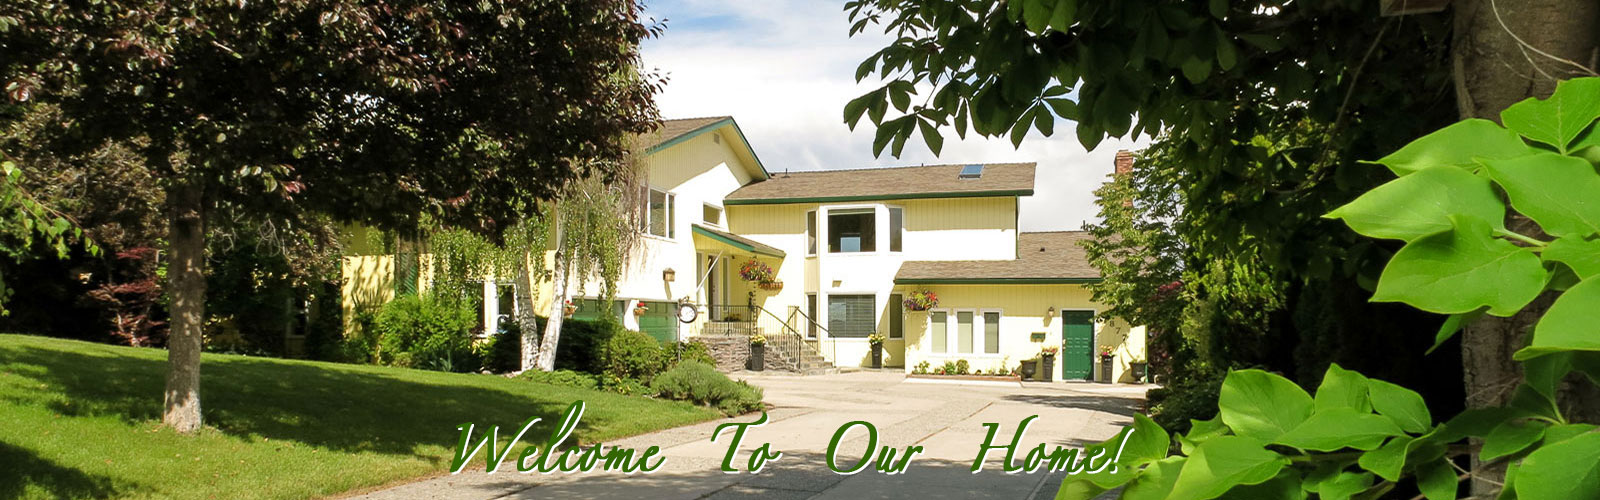 Welcome to A View of the Lake, our luxurious Bed and Breakfast welcoming visitors to the Kelowna area in British Columbia, Canada.